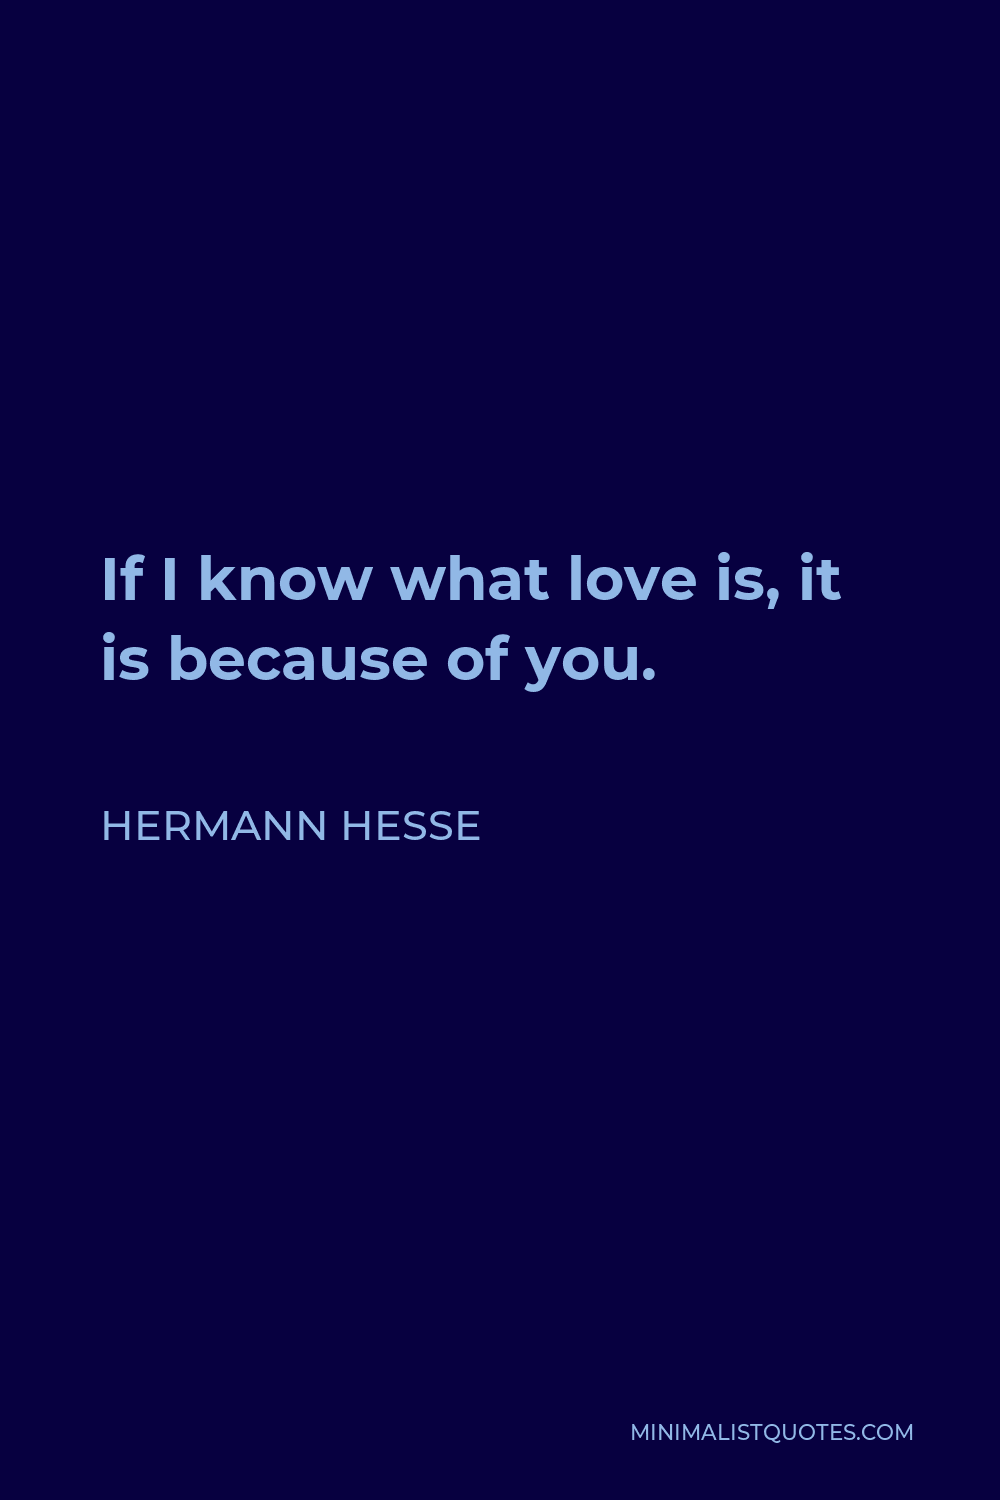 Hermann Hesse Quote - If I know what love is, it is because of you.